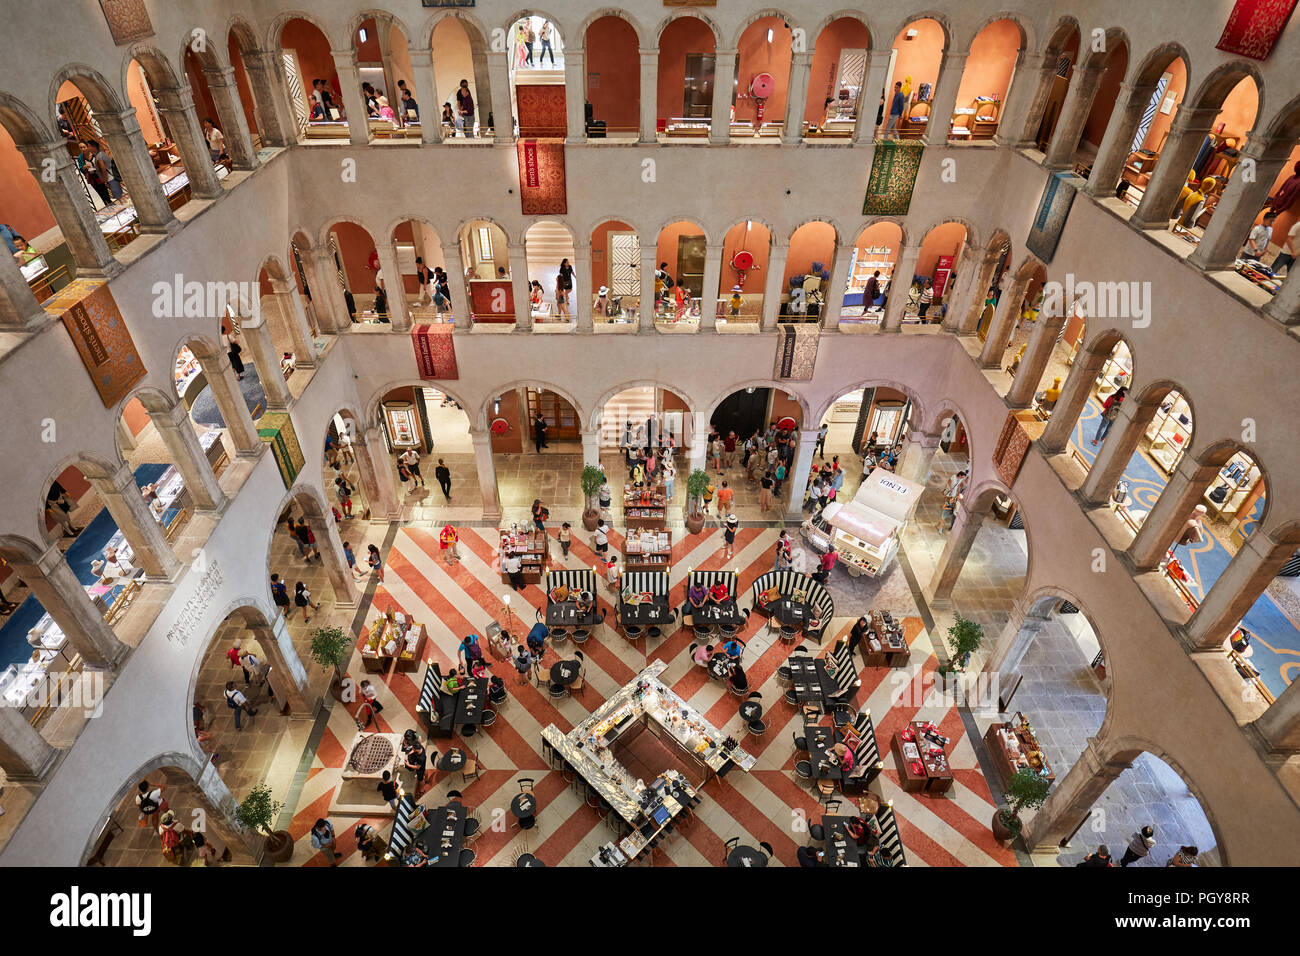 VENICE, ITALY - AUGUST 15, 2017: Fondaco dei Tedeschi, luxury department store interior, high angle view with people and tourists Stock Photo